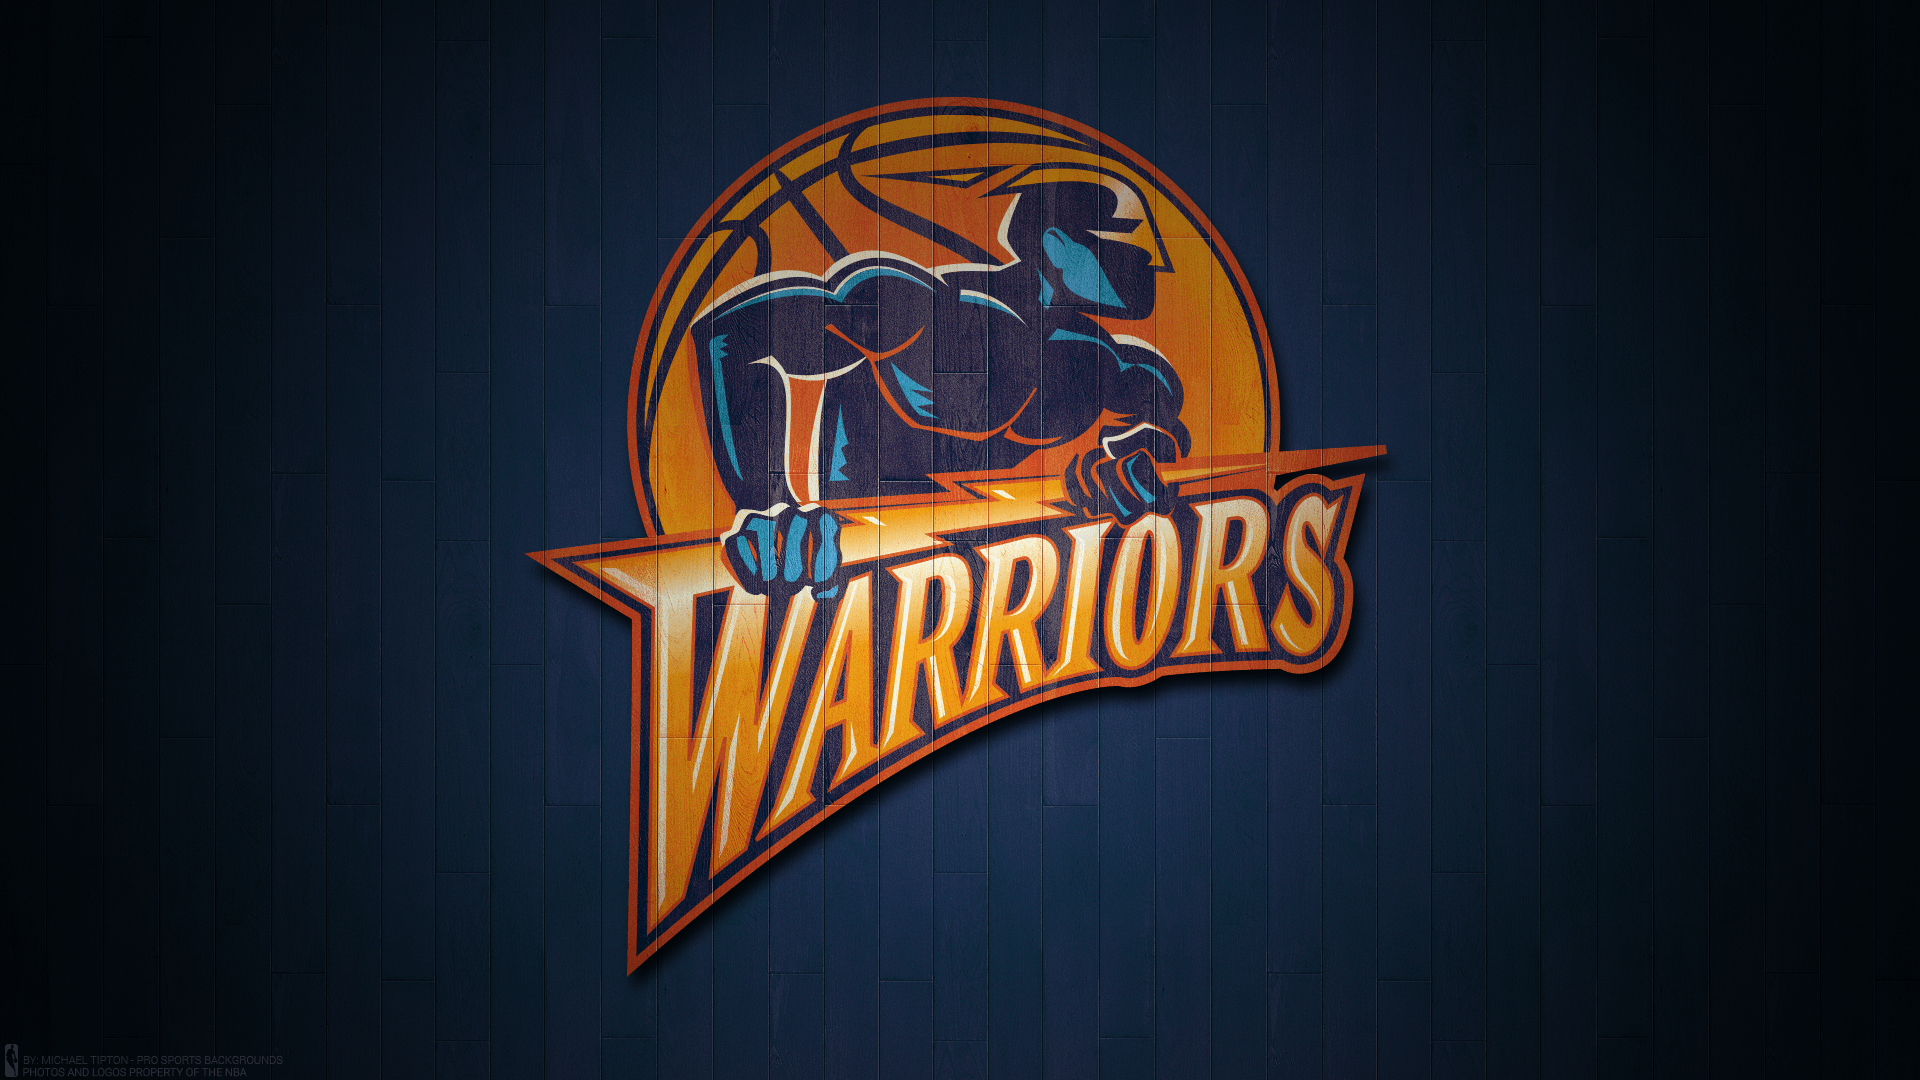 Golden State Warriors Wallpaper. iPhone. Android